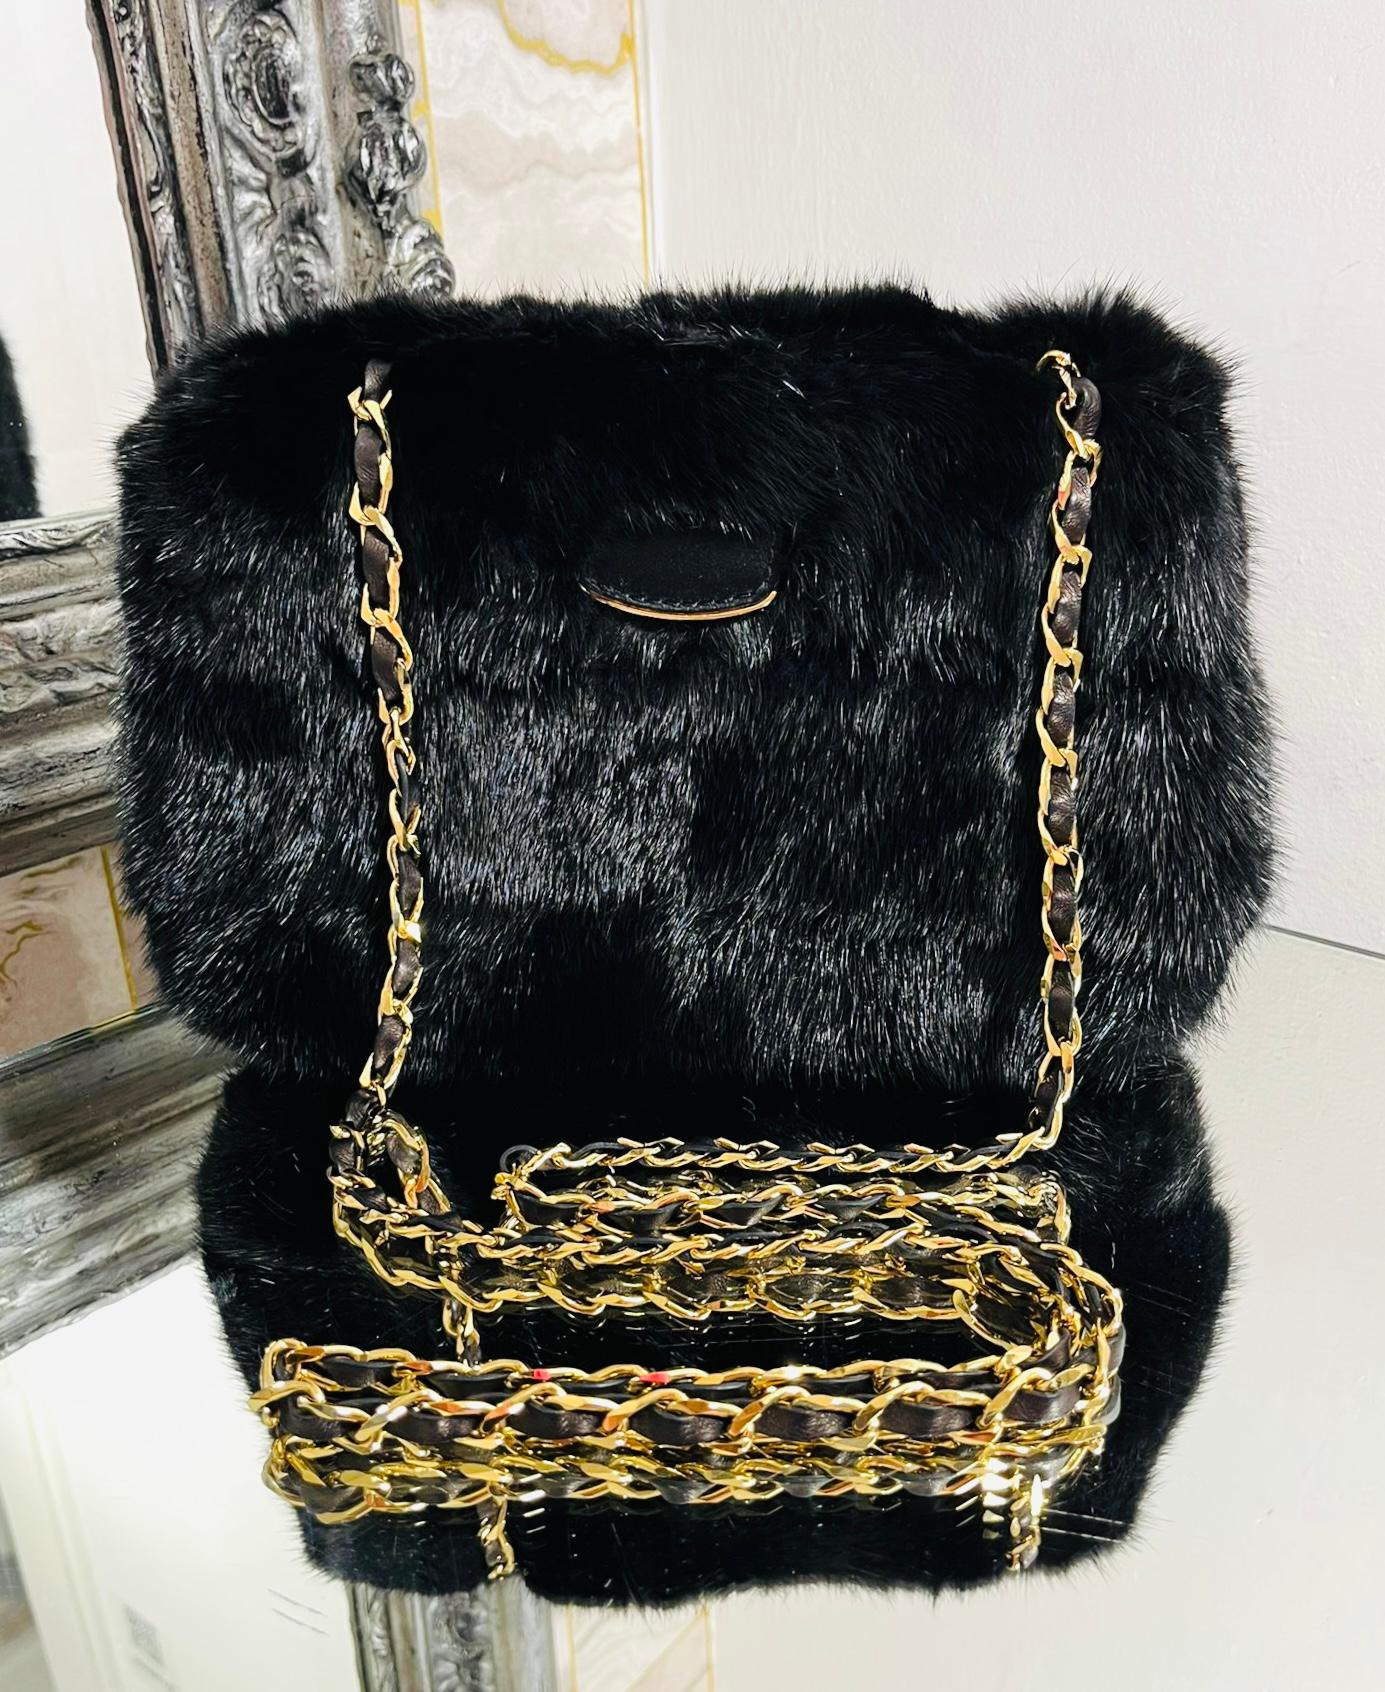 Tyler Ellis Mink Fur Clutch Bag With Leather & Chain Strap

Black structured fur bag designed with gold chain and leather, thin shoulder strap.

Featuring front flap closure leading to bright blue interior.

Size – Height 19cm, Width 27cm, Depth